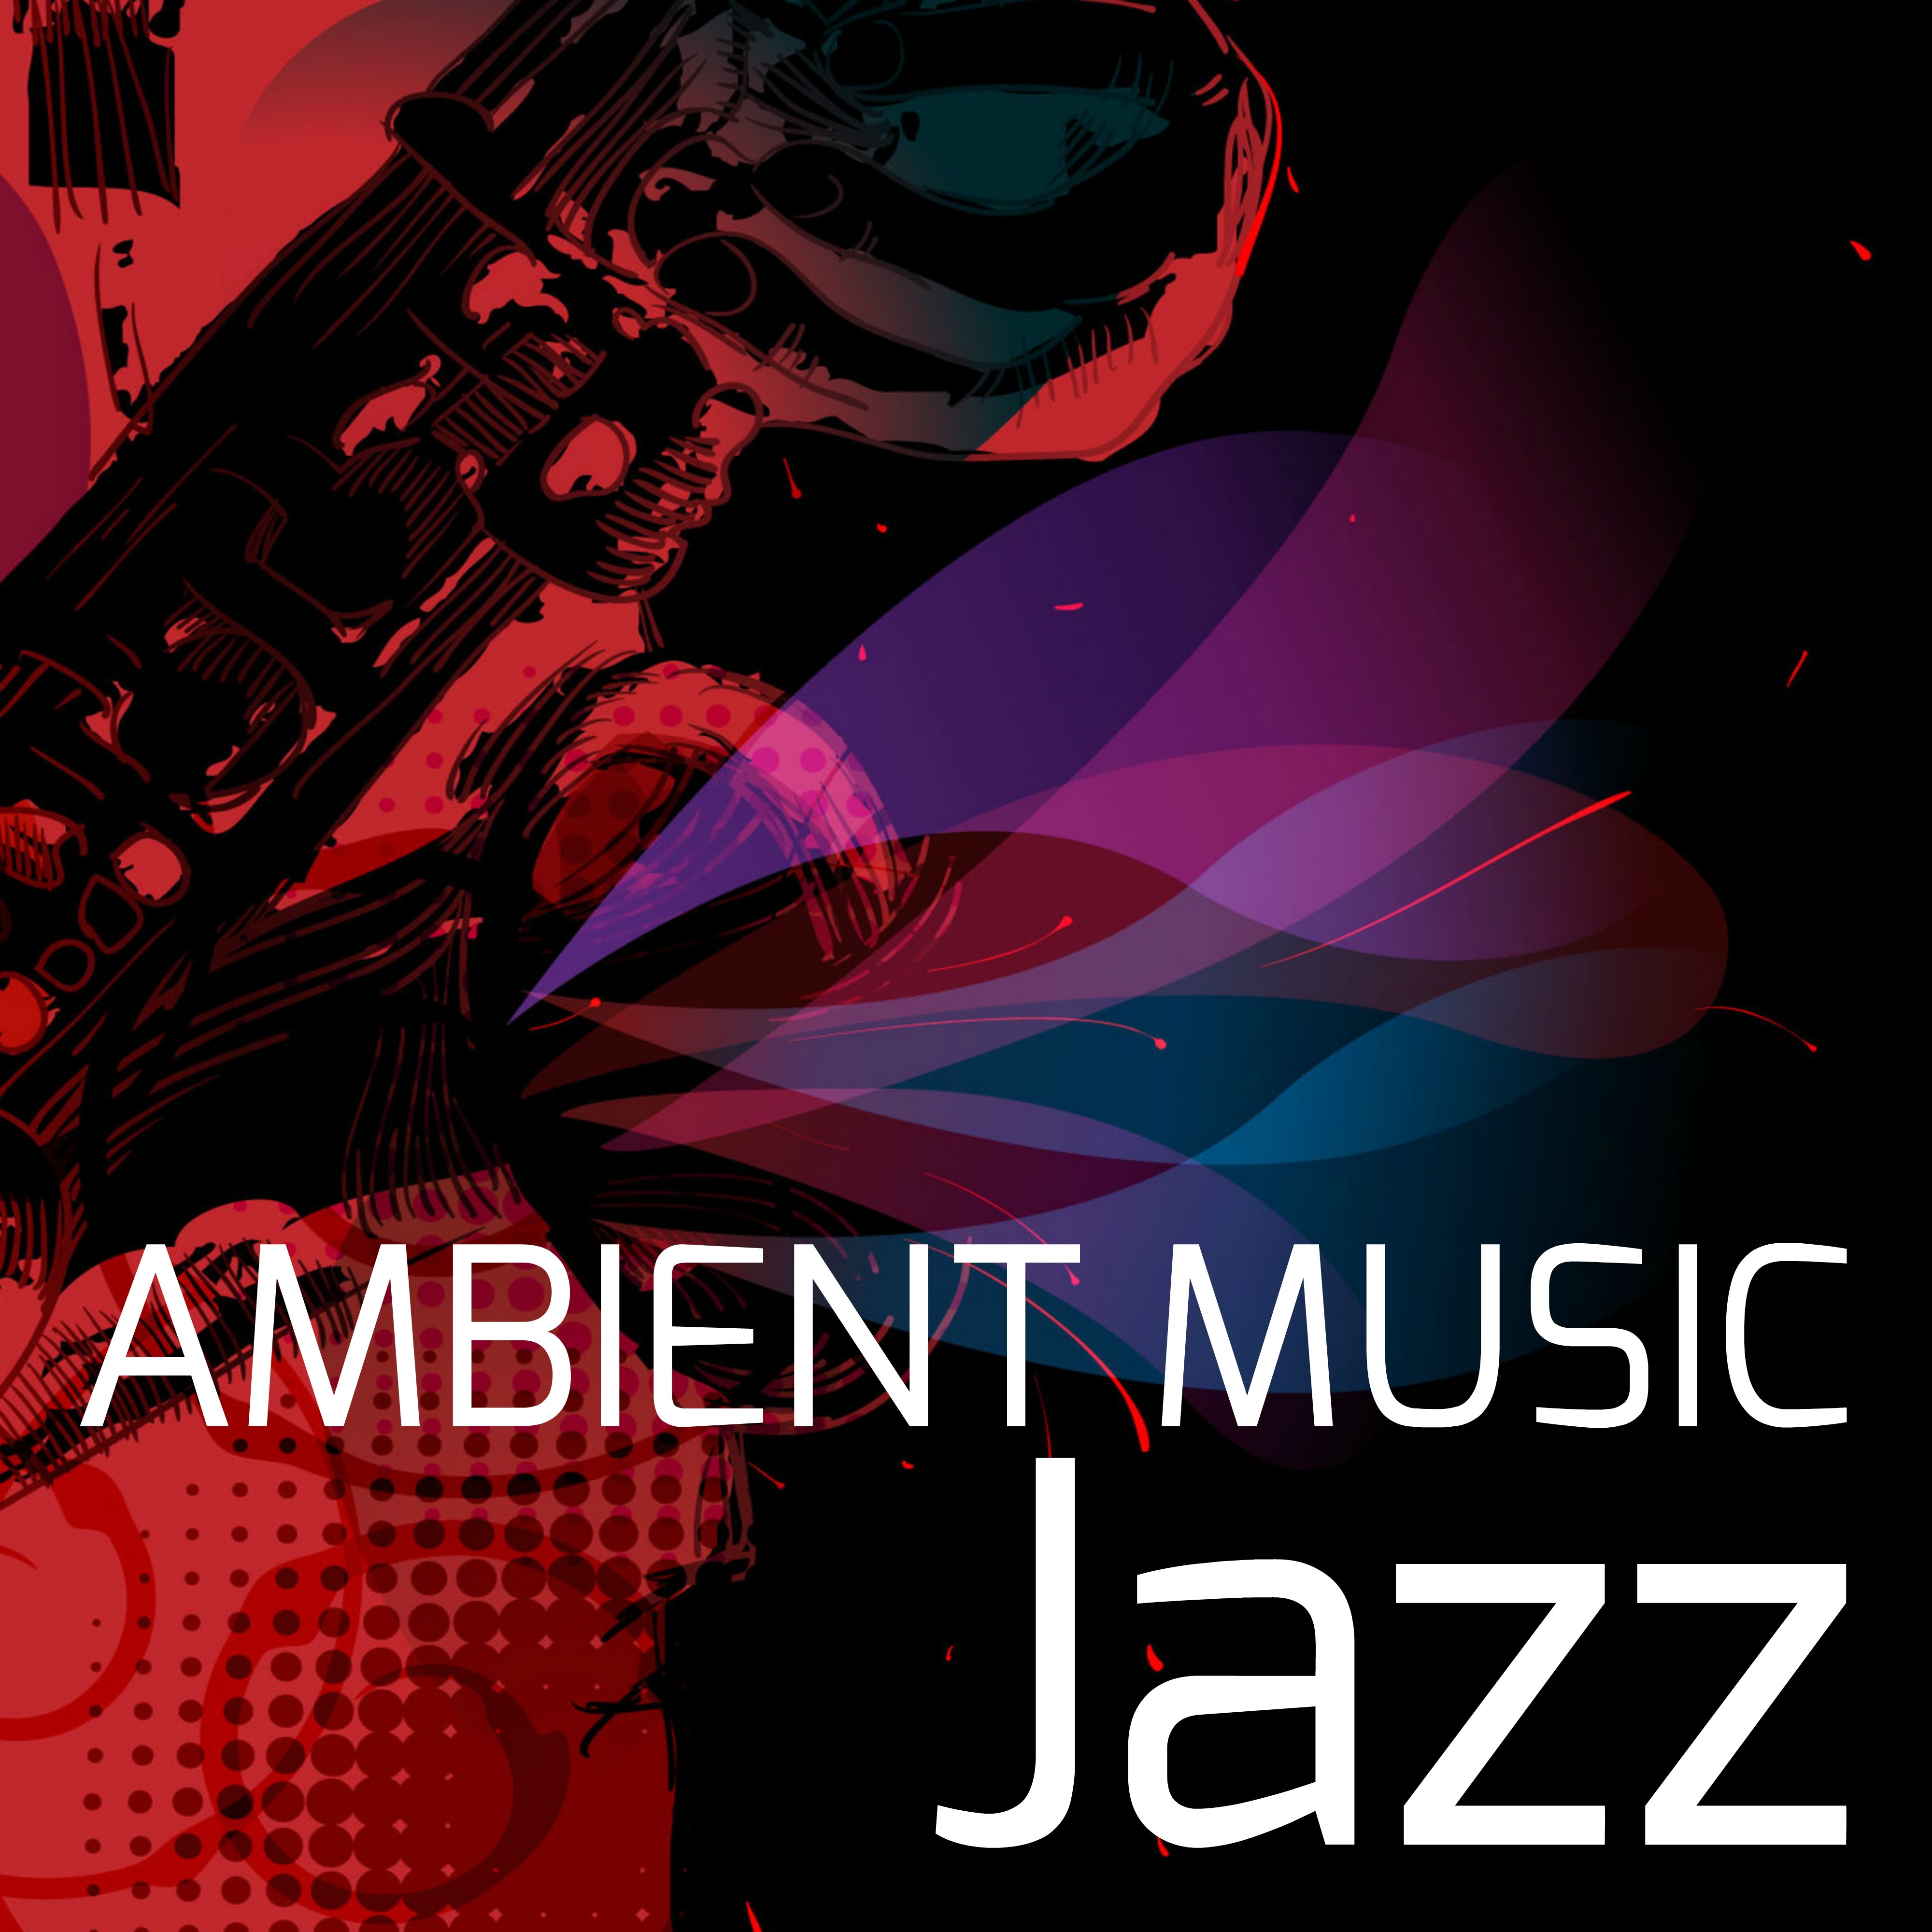 Ambient Music Jazz  Compilation Jazz, Waiting Room, Lift  Elevator Music for Relaxation and Stress Relief